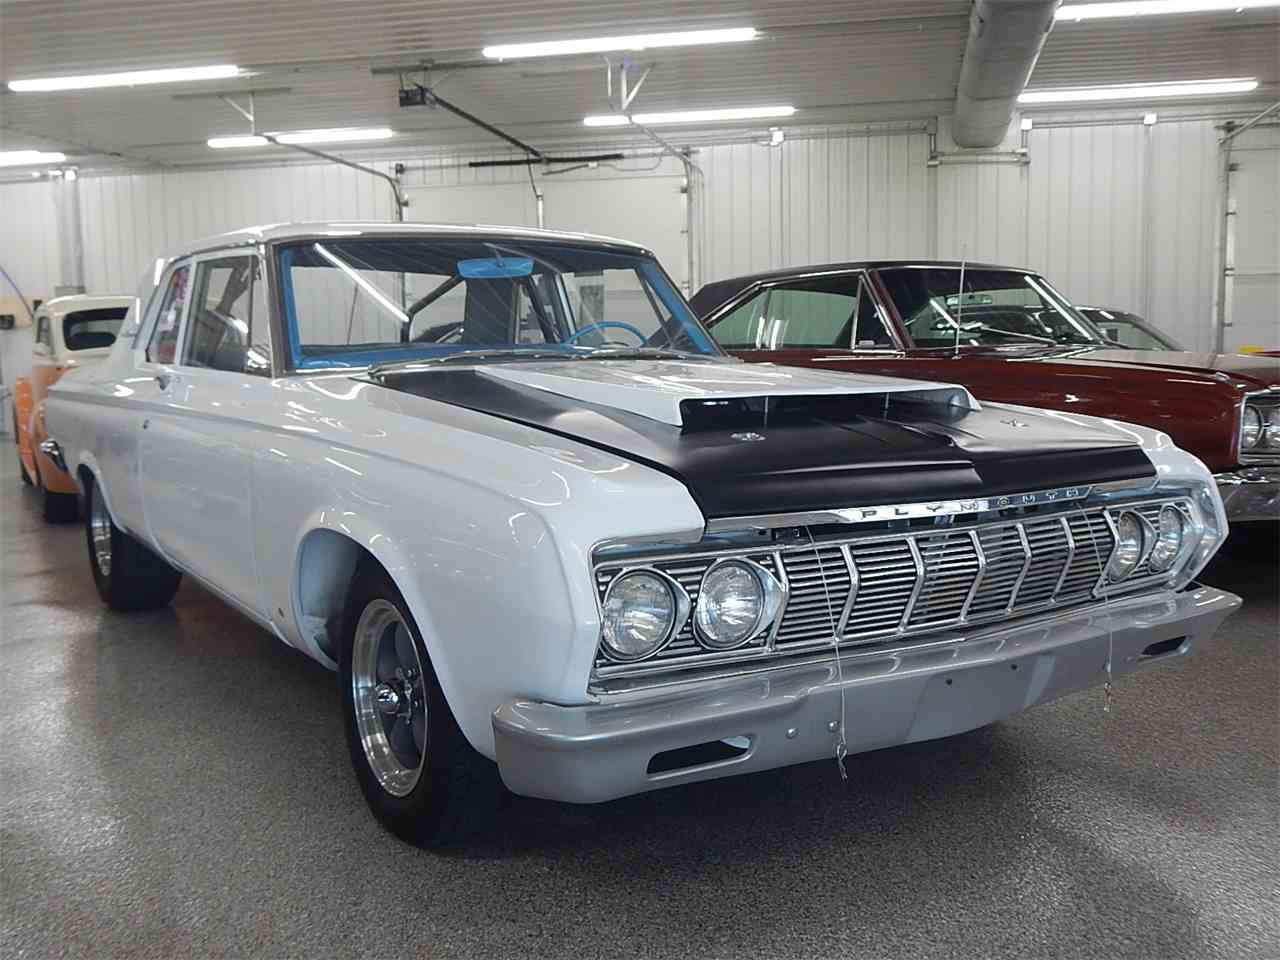 1964 Plymouth Belvedere For Sale Classiccars Cc 959359 with The Most Brilliant classic cars celina ohio for Your favorite car choice